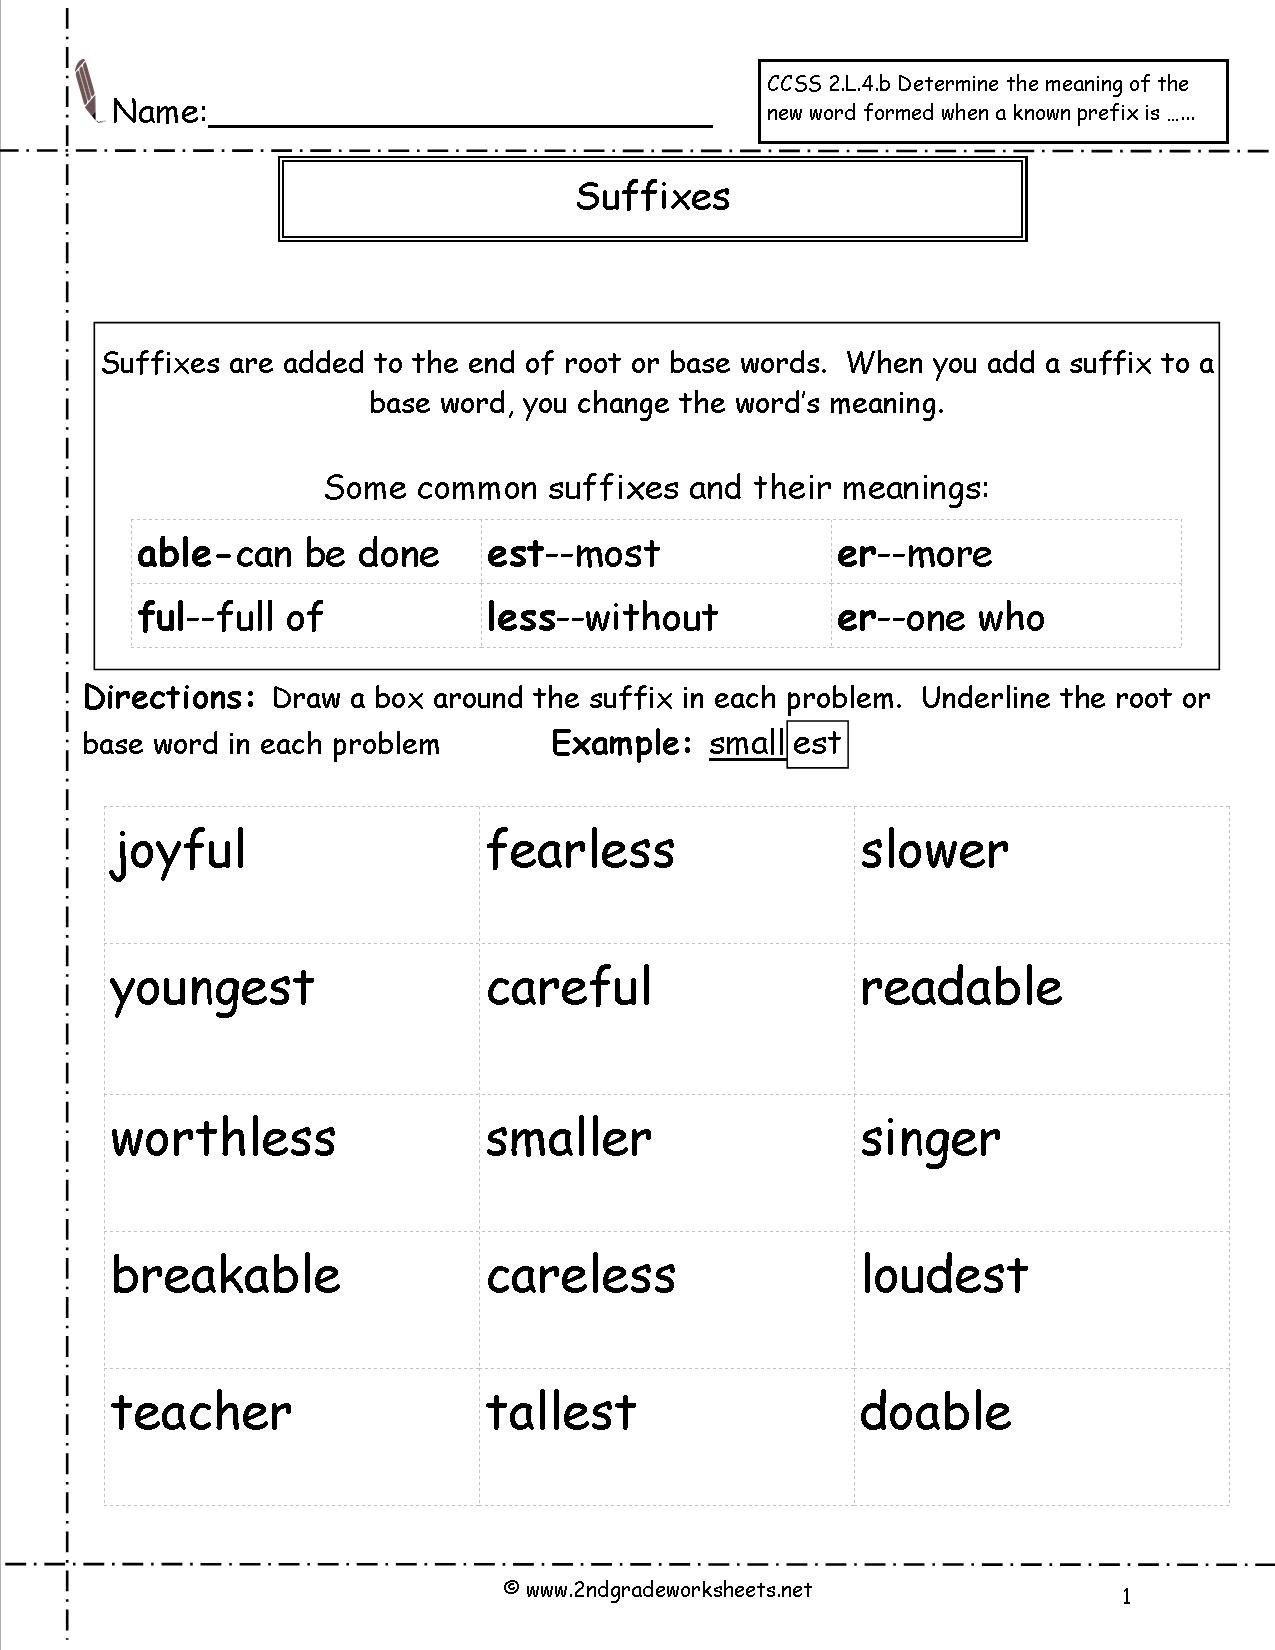 Free Printable Suffix Worksheets For 4th Grade